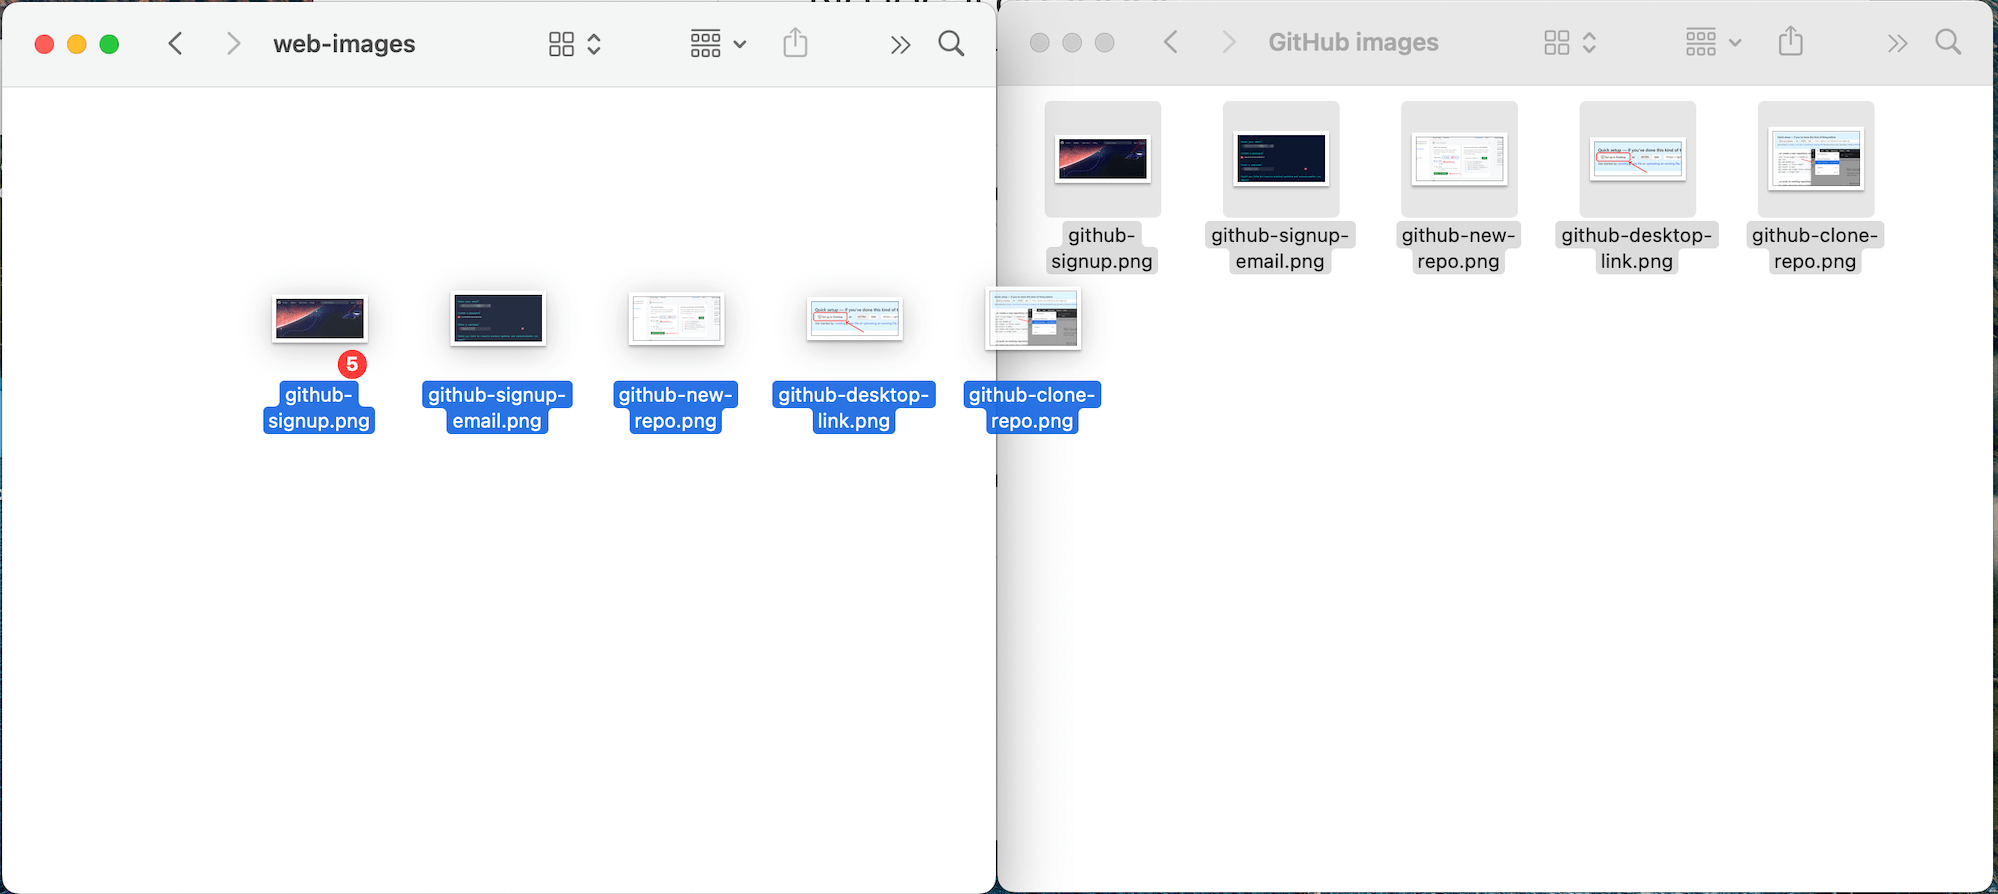 Copying images in your GitHub repo